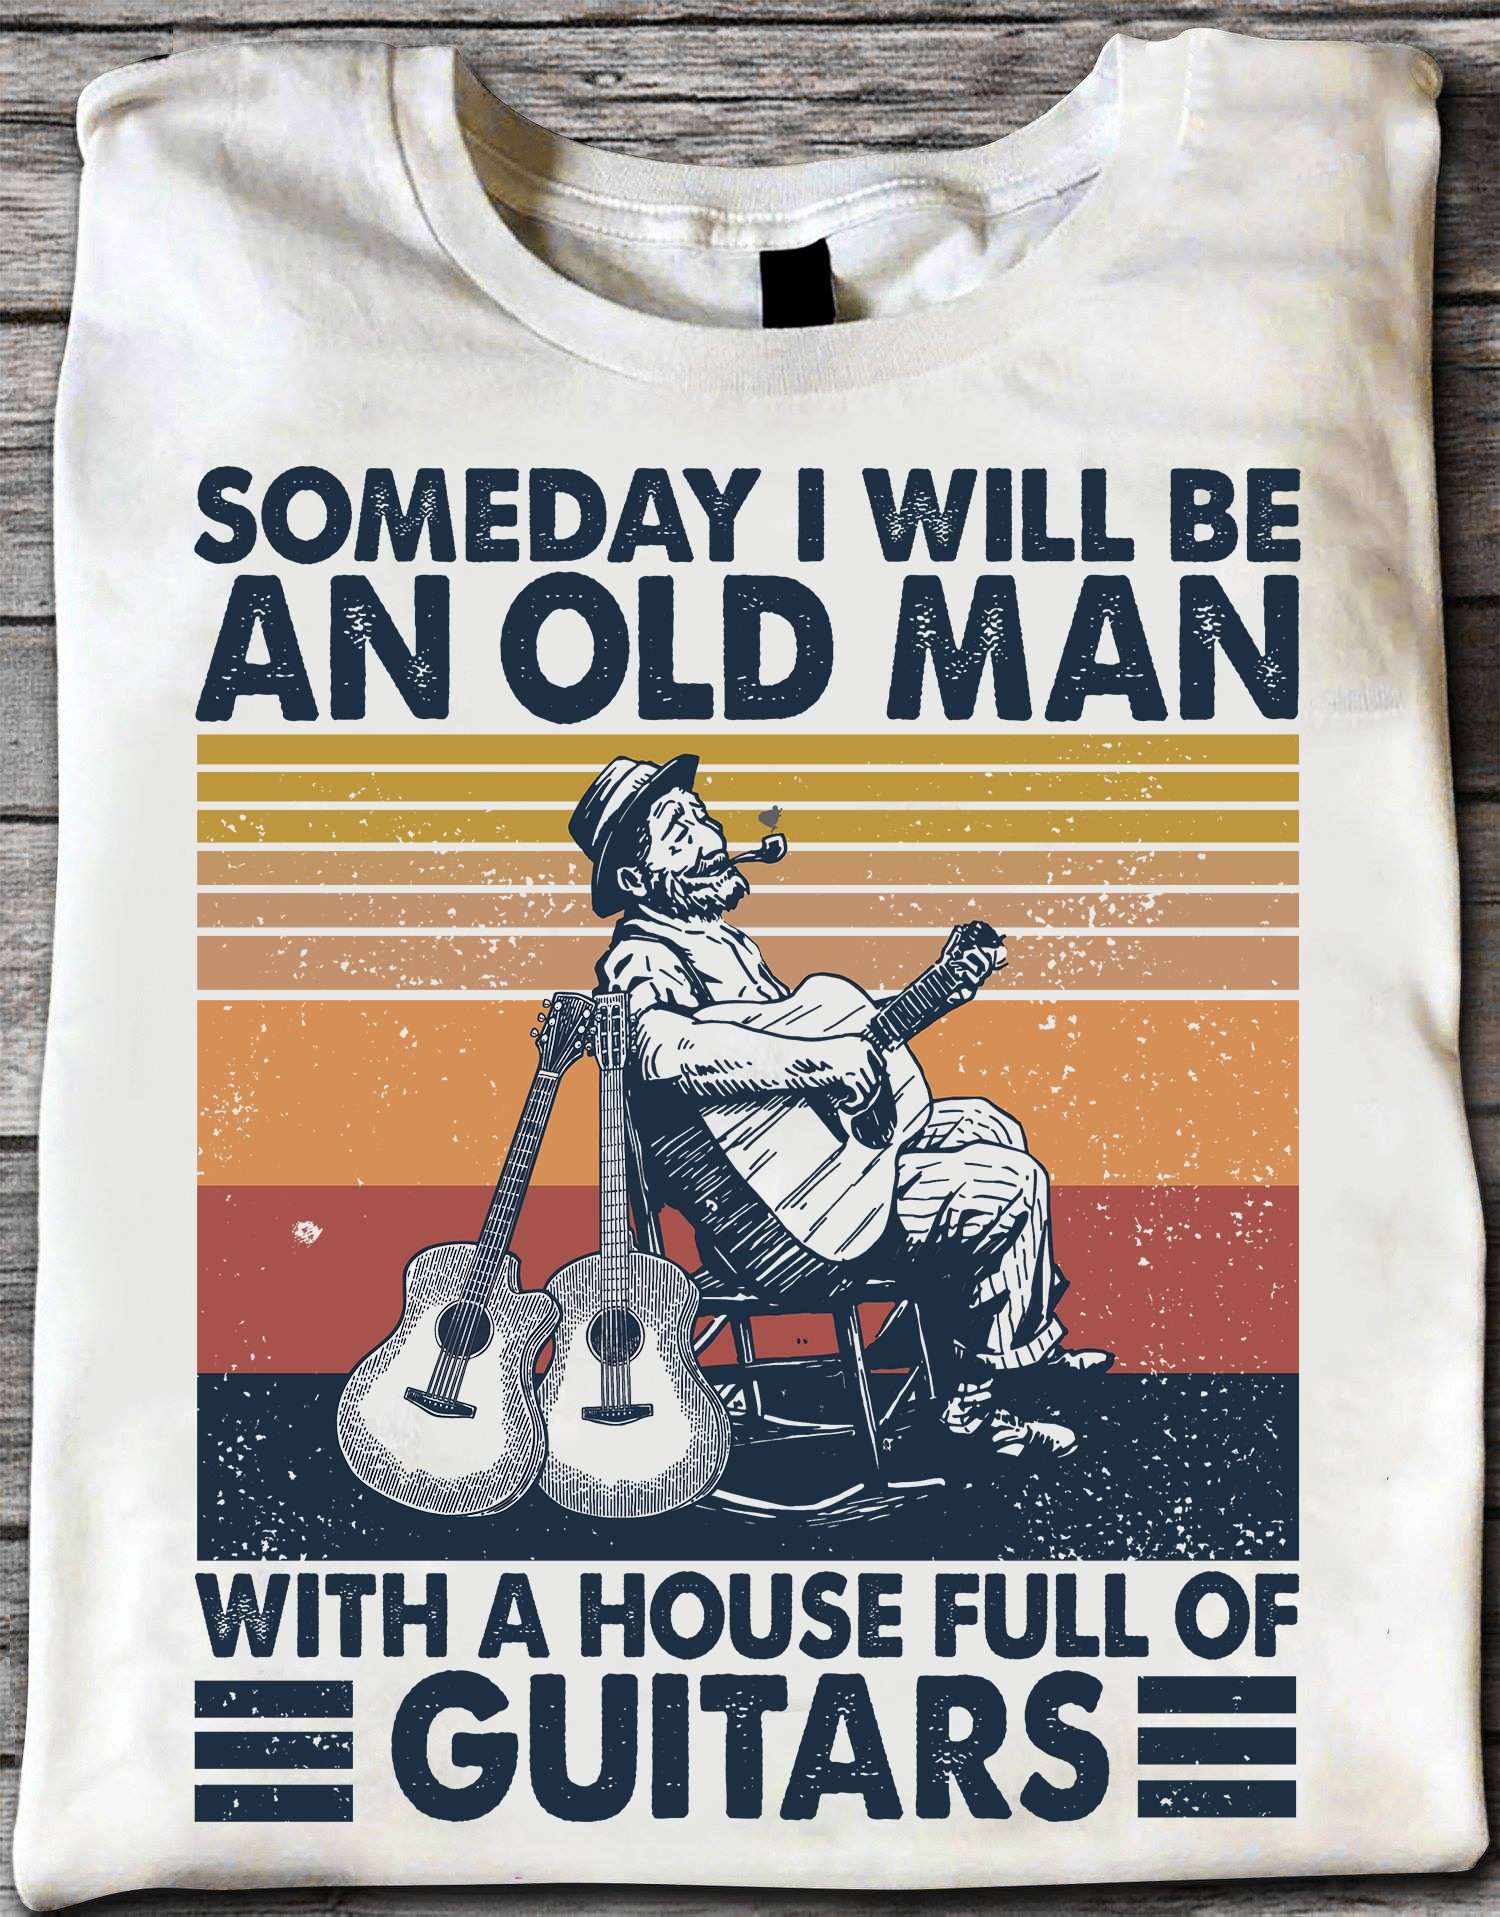 Old Man Playing Guitar - Someday i will an old man with a house full of guitar